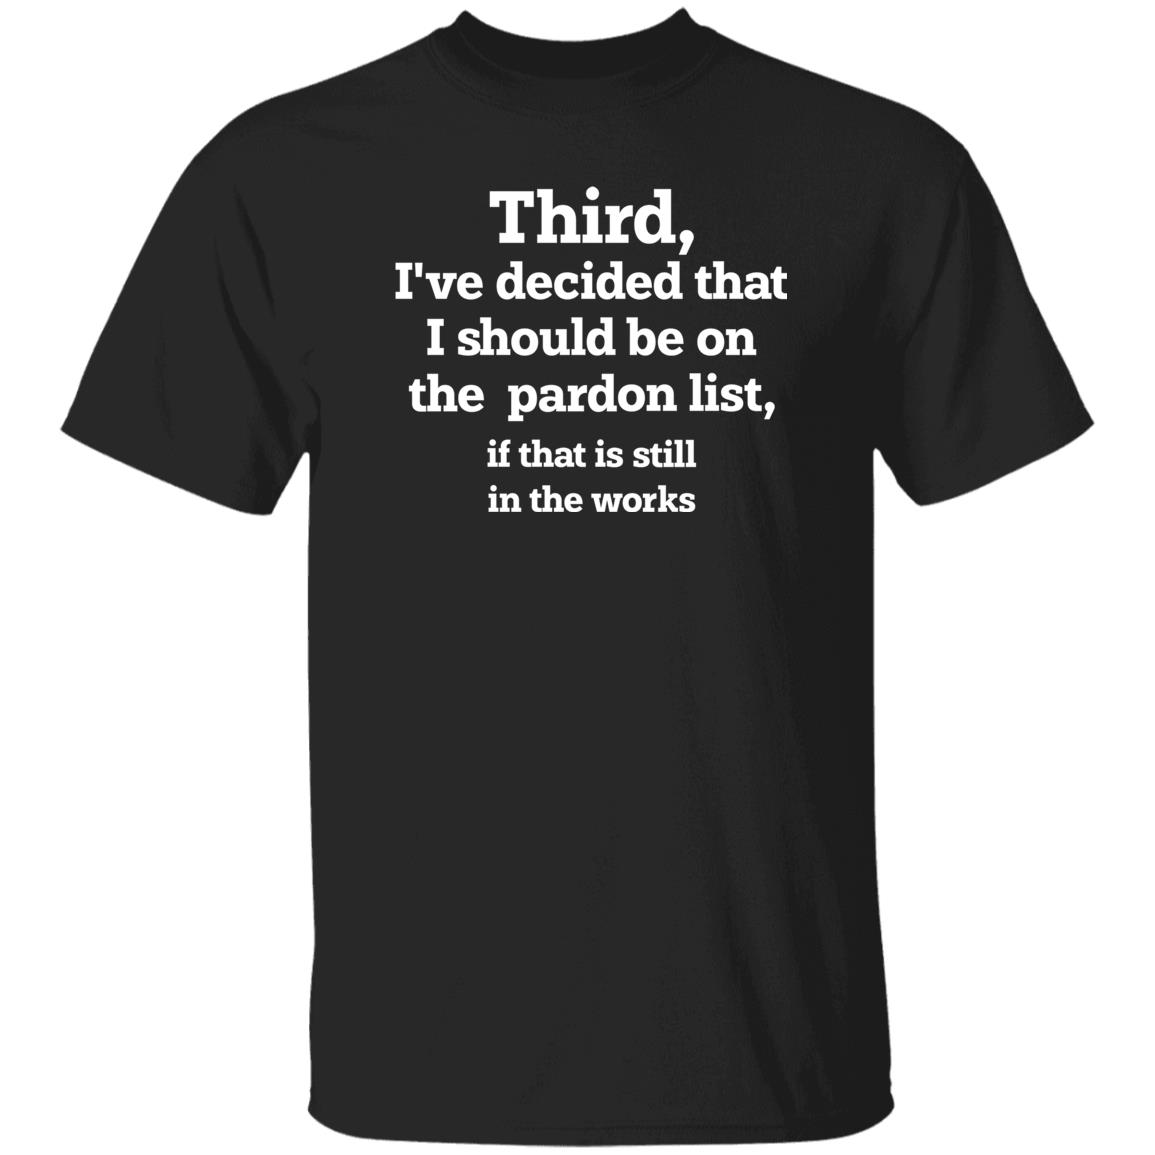 Walter Hickey Third I’ve Decided That I Should Be On Pardon List If That Is Still In The Works Shirt Grace Panetta